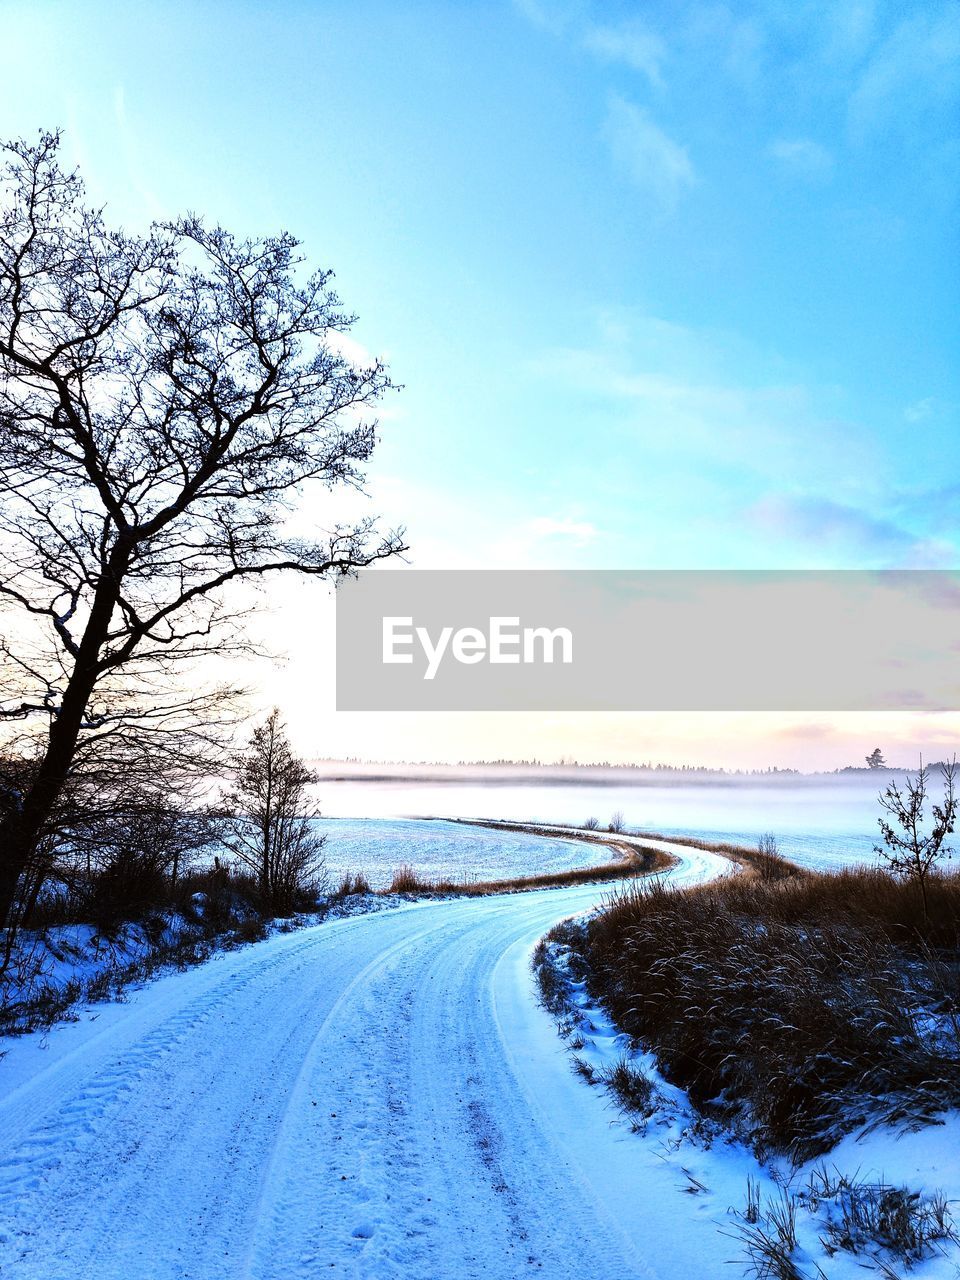 sky, snow, winter, cold temperature, tree, nature, scenics - nature, plant, beauty in nature, cloud, environment, road, landscape, tranquility, tranquil scene, no people, morning, blue, the way forward, sunlight, land, transportation, frozen, non-urban scene, horizon, outdoors, water, freezing, white, day, bare tree, diminishing perspective, travel, dusk